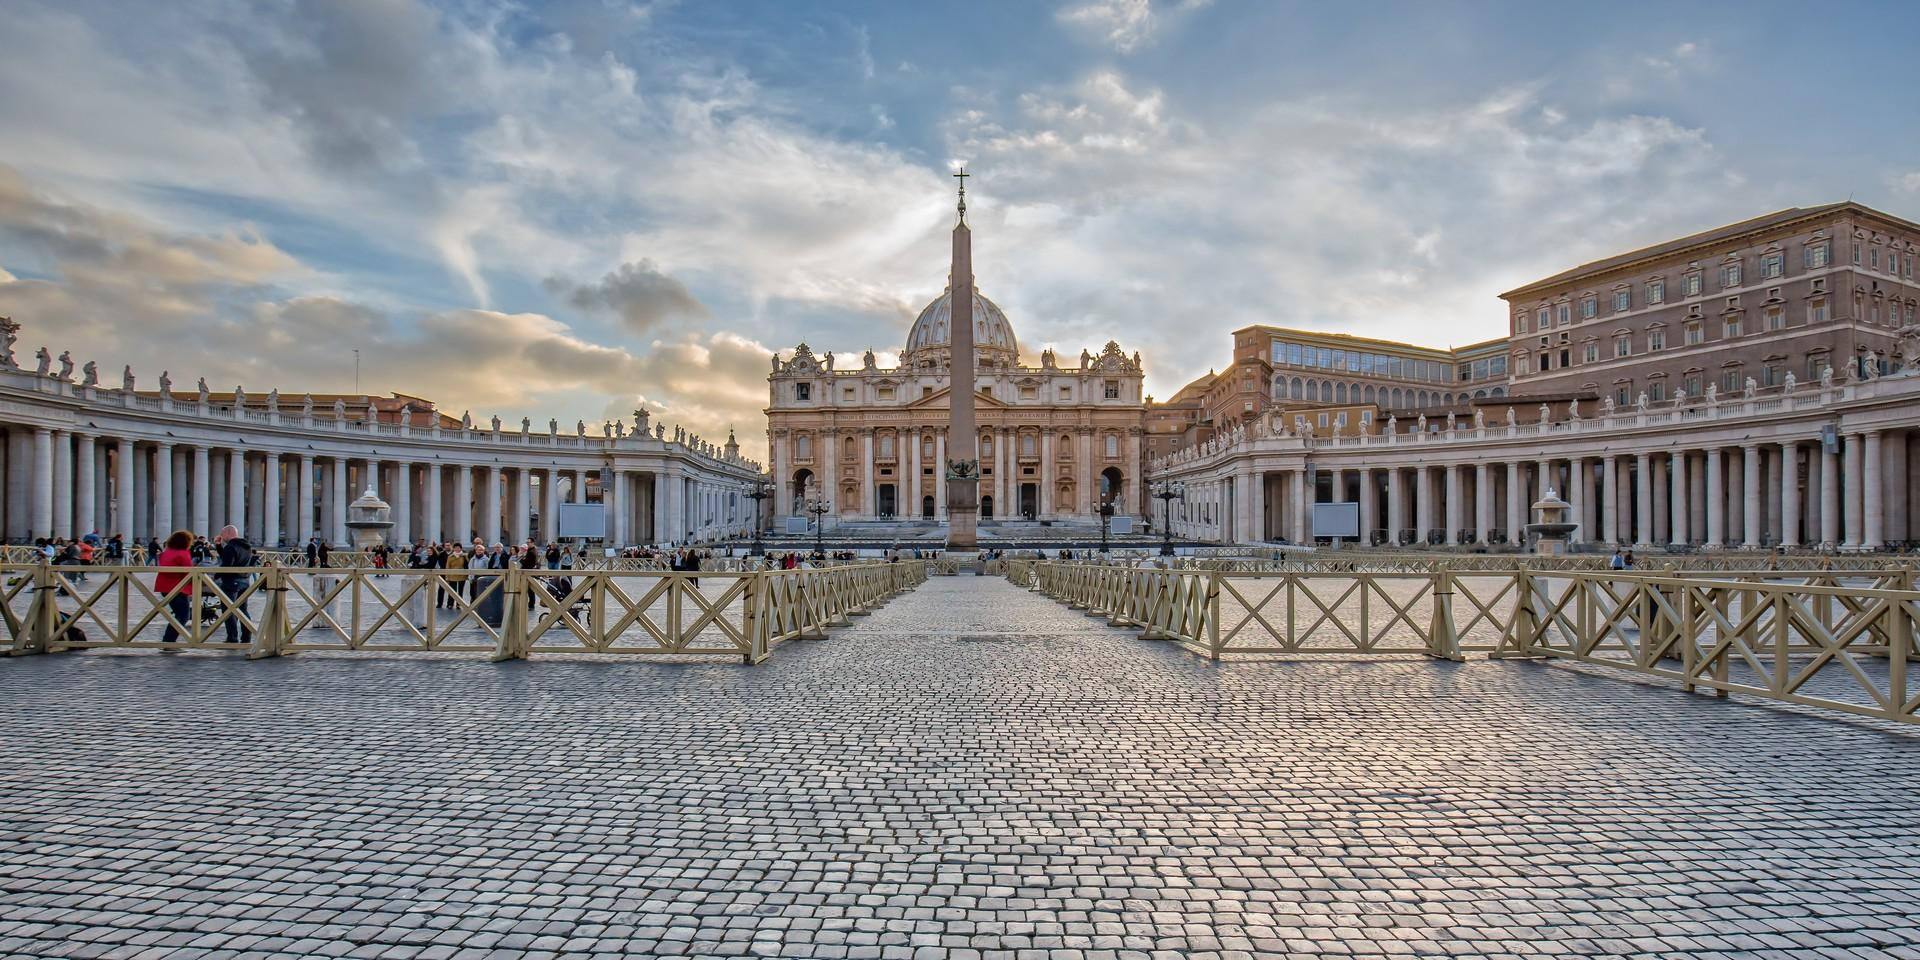 Architecture in Vatican City in sunny weather with few clouds